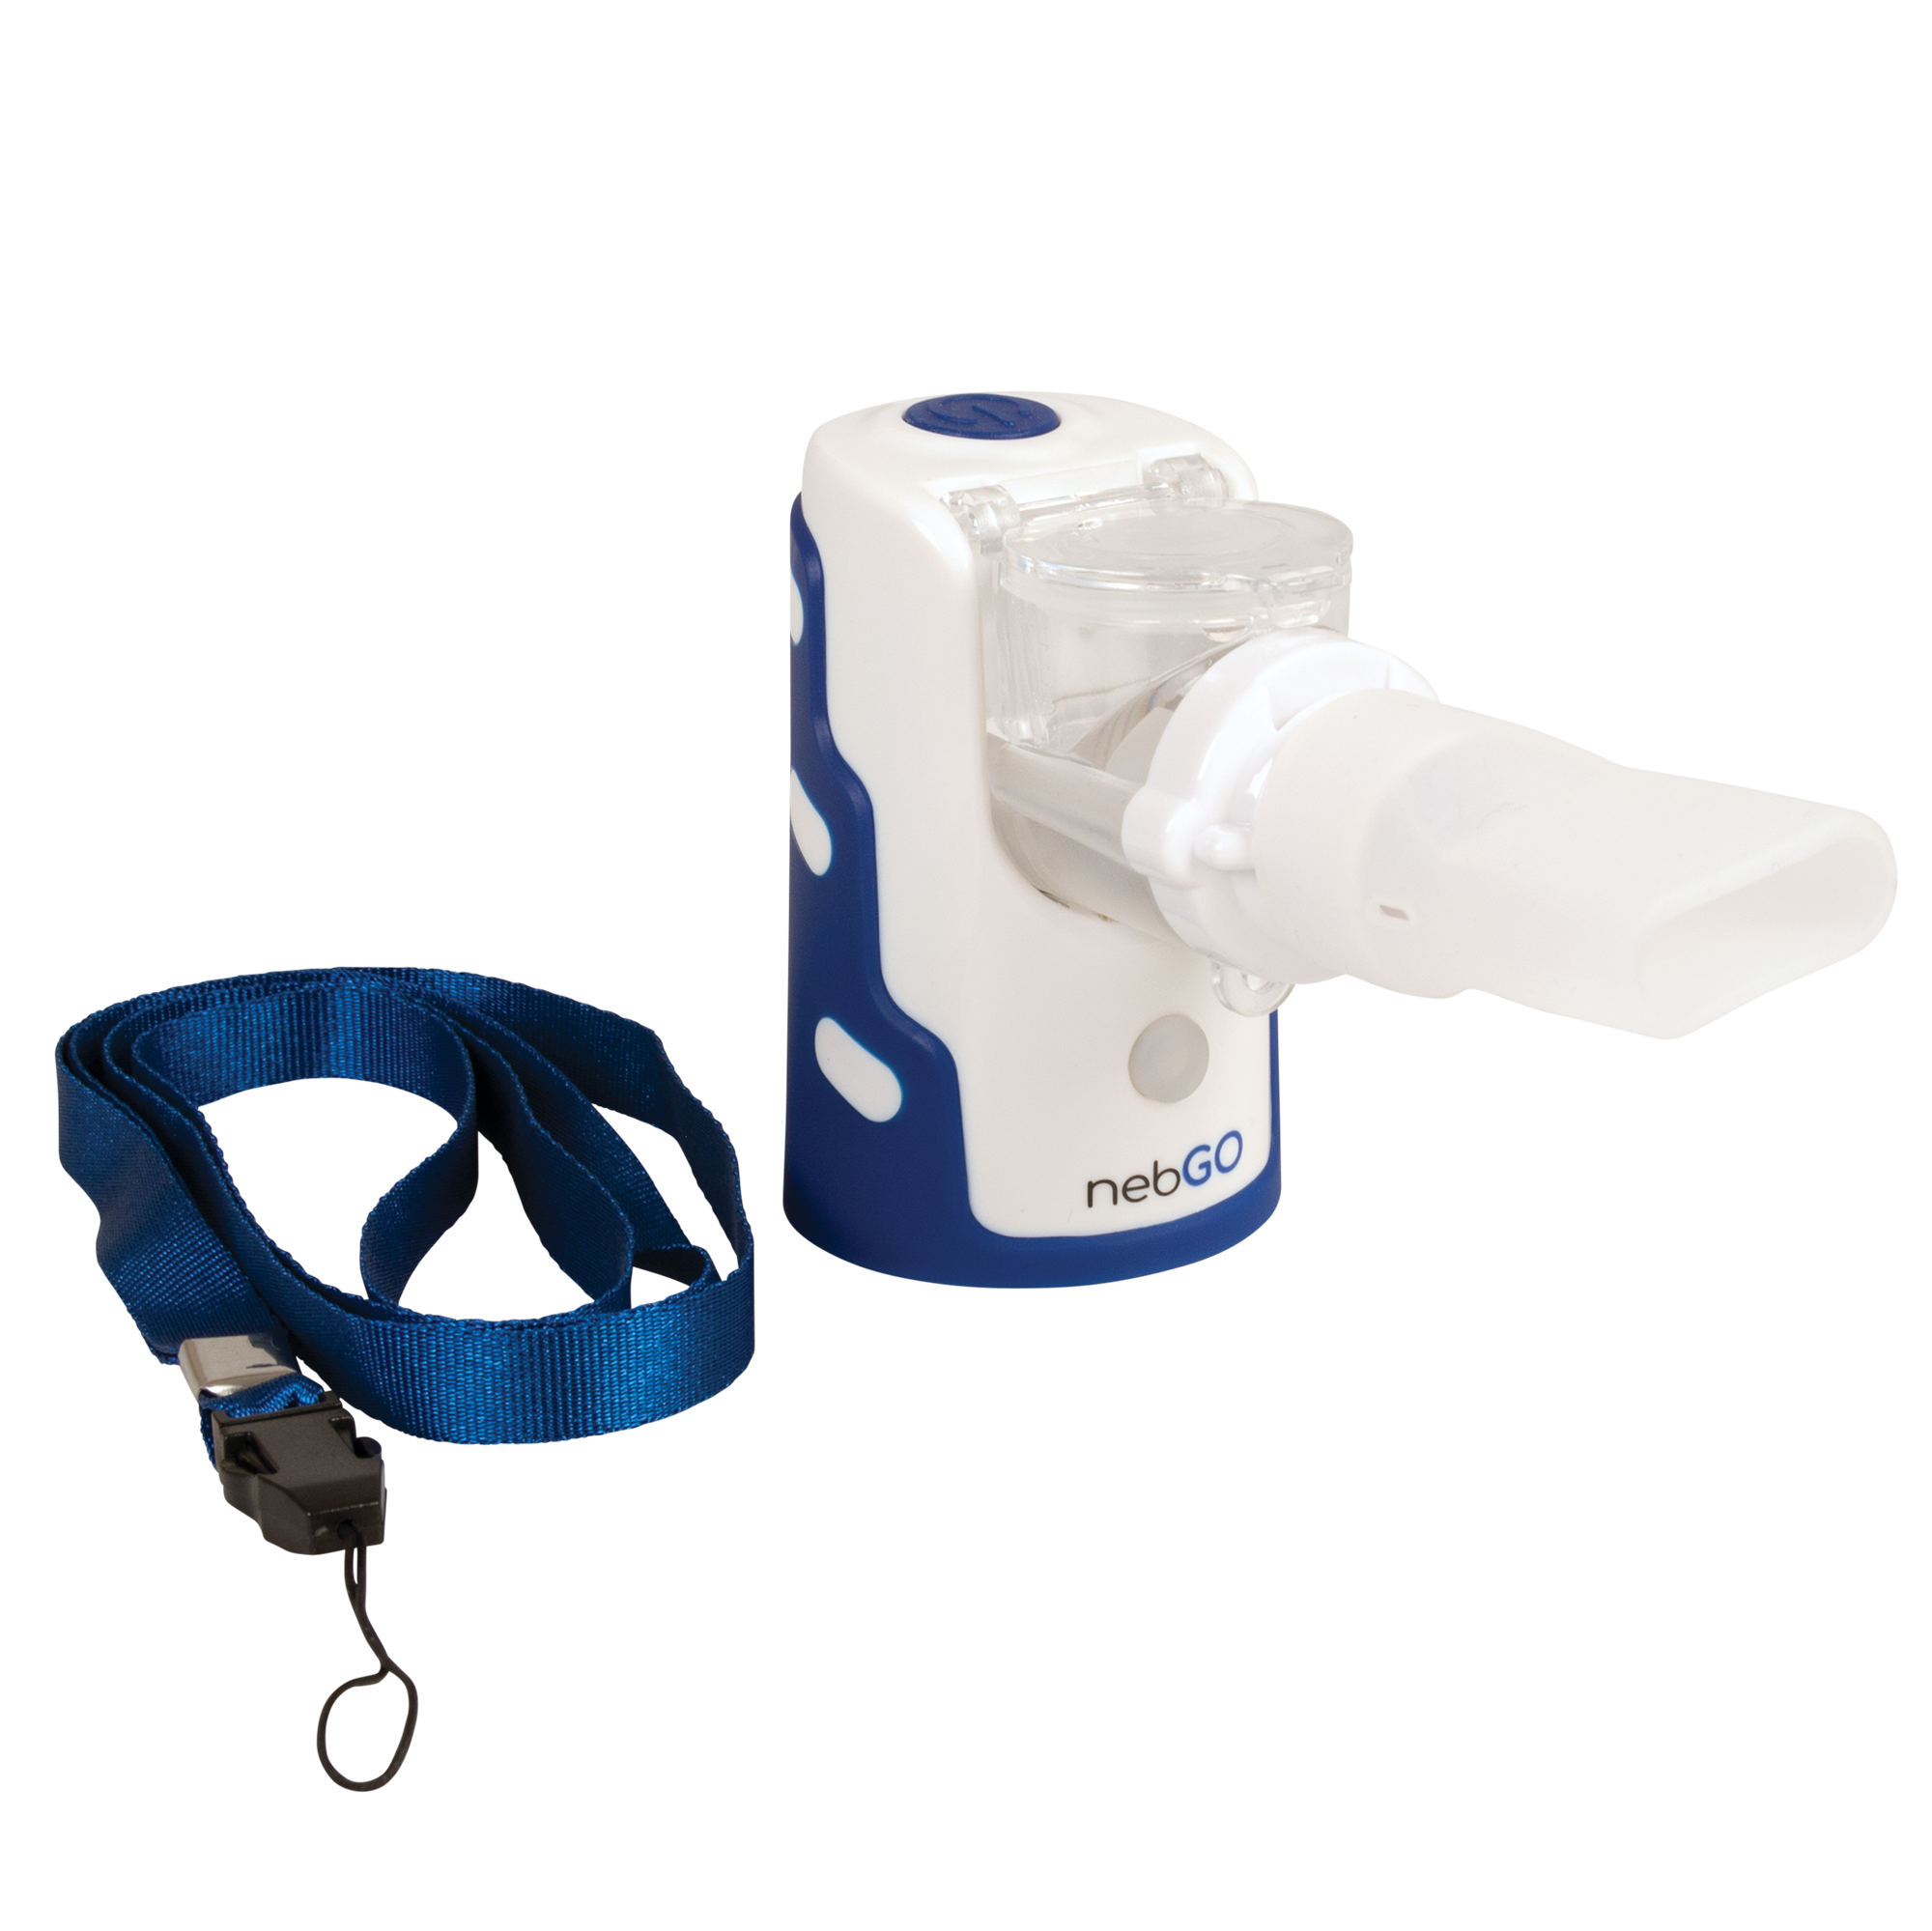 Picture of the portable handheld nebulizer - nebGo